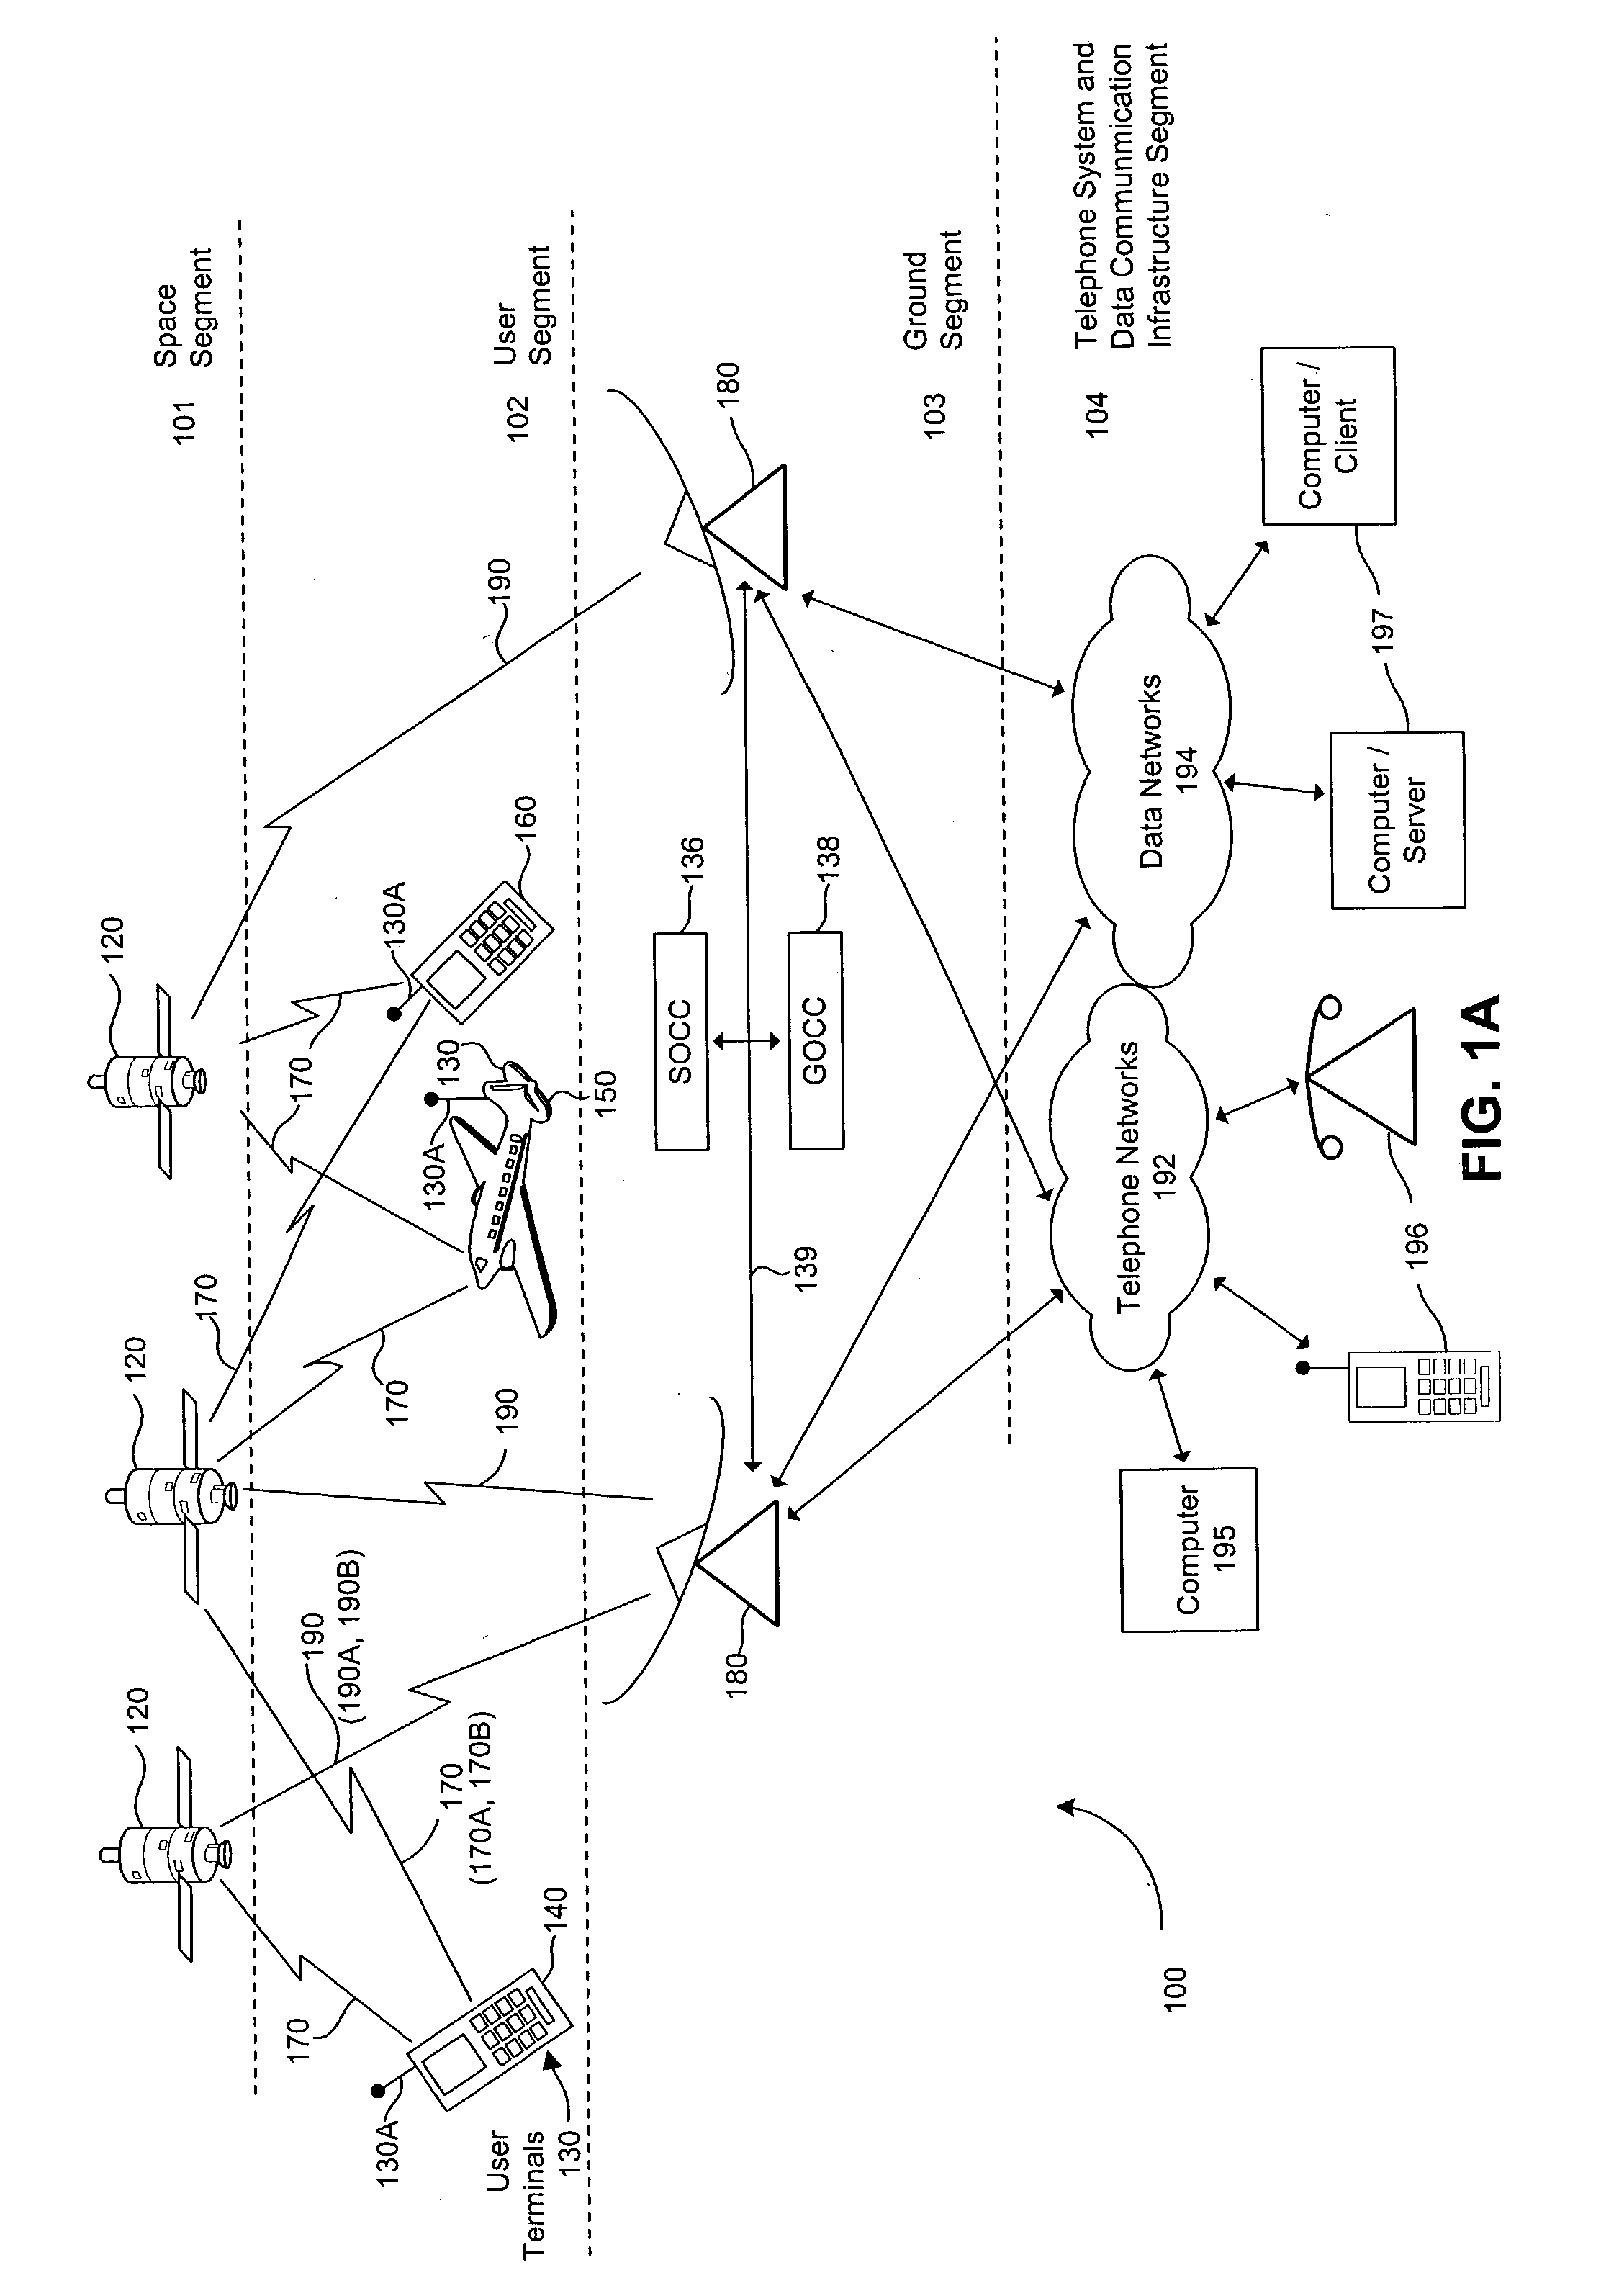 Aggregating multiple wireless communication channels for high data rate transfers